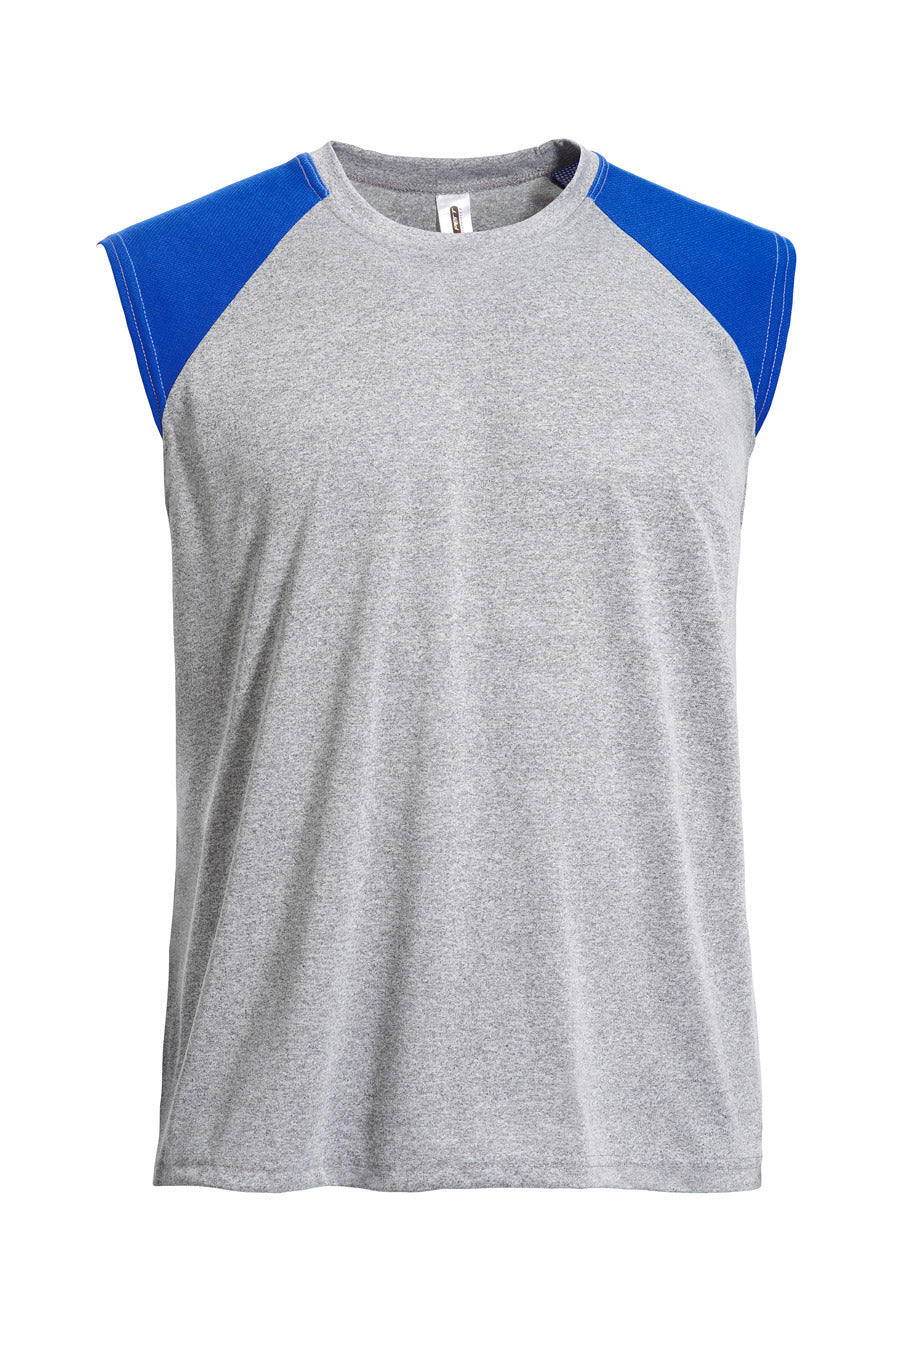 Natural Feel Jersey Colorblock Training Tank 🇺🇸 - Expert Brand Apparel#color_gray-heather-royal